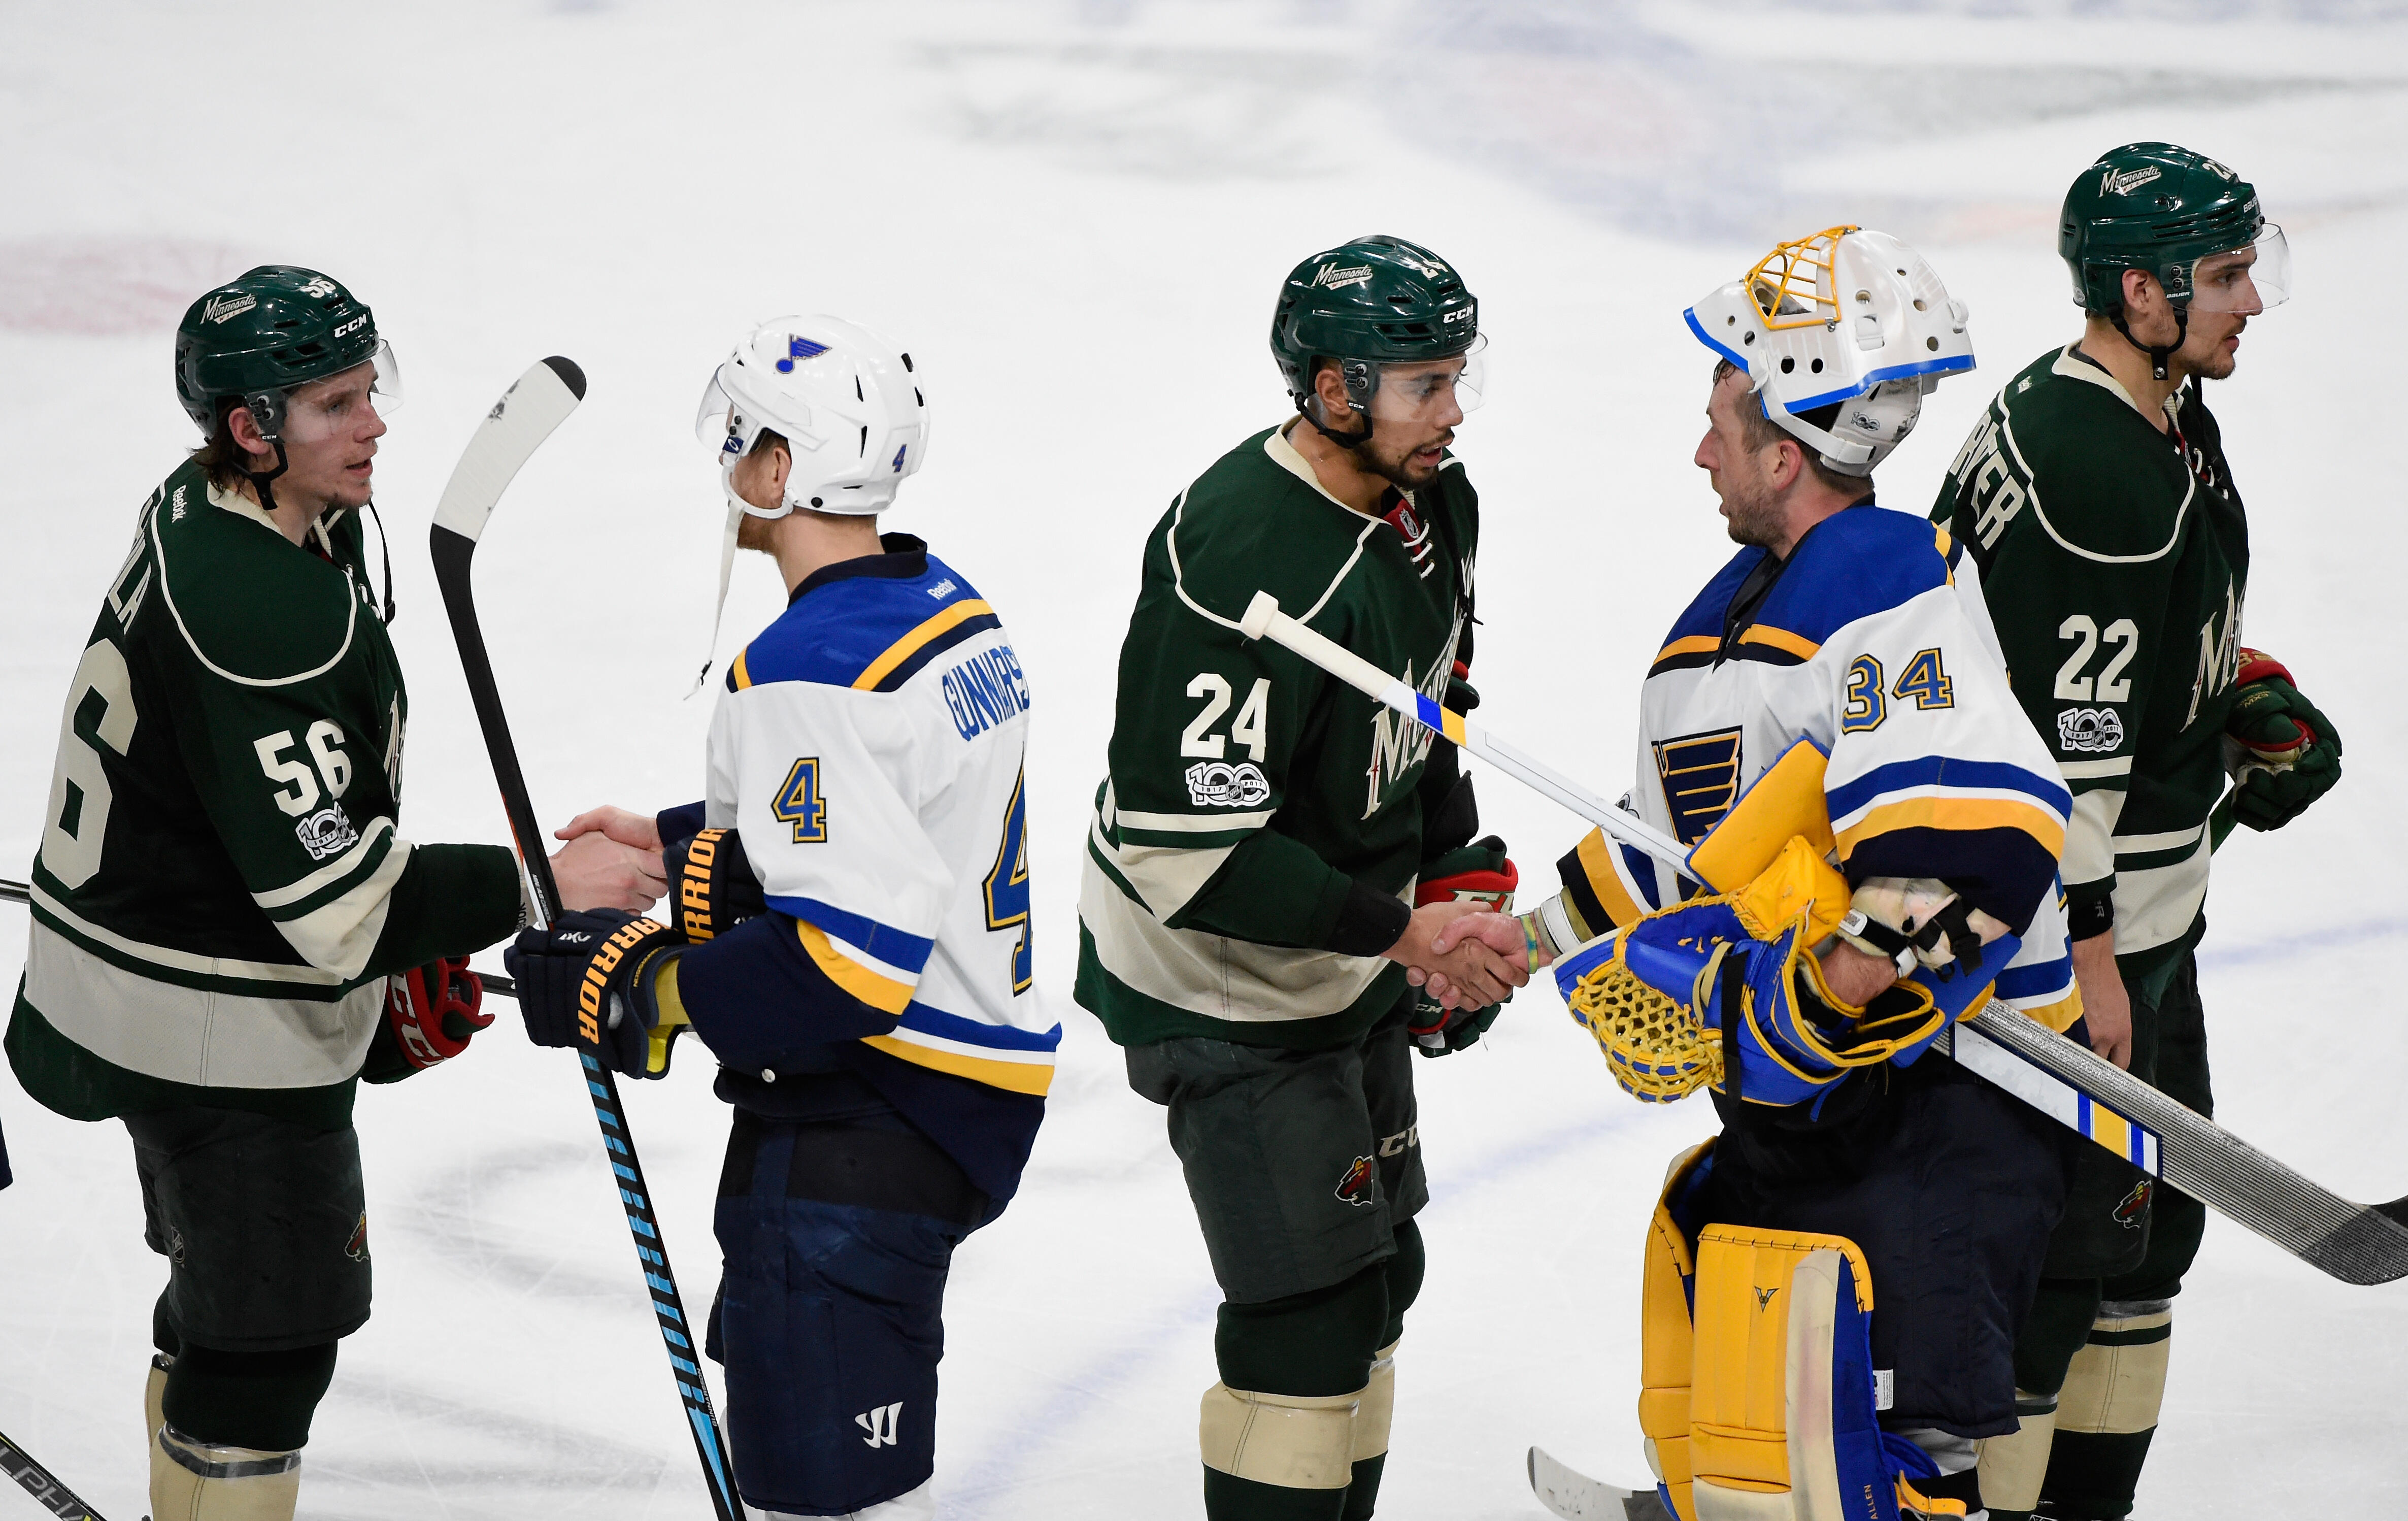 ST PAUL, MN - APRIL 22: Eric Haula #56, Matt Dumba #24 and Nino Niederreiter #22 of the Minnesota Wild shake hands with Carl Gunnarsson #4 and goalie Jake Allen #34 of the St. Louis Blues after Game Five of the Western Conference First Round during the 20